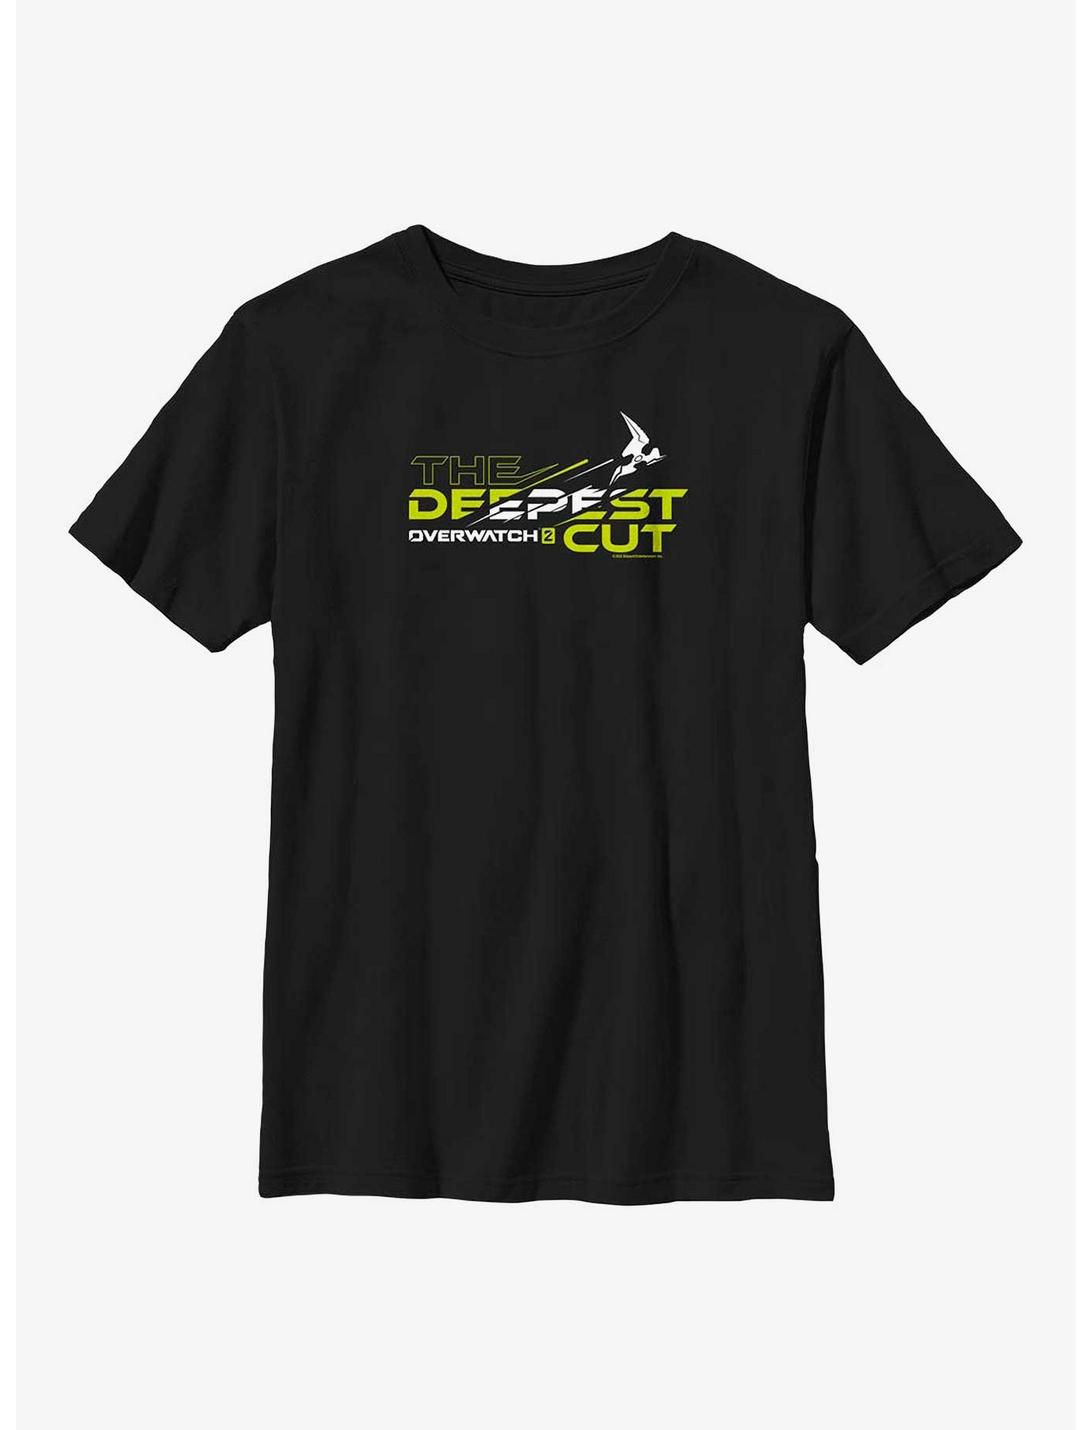 Overwatch 2 The Deepest Cut Youth T-Shirt, BLACK, hi-res